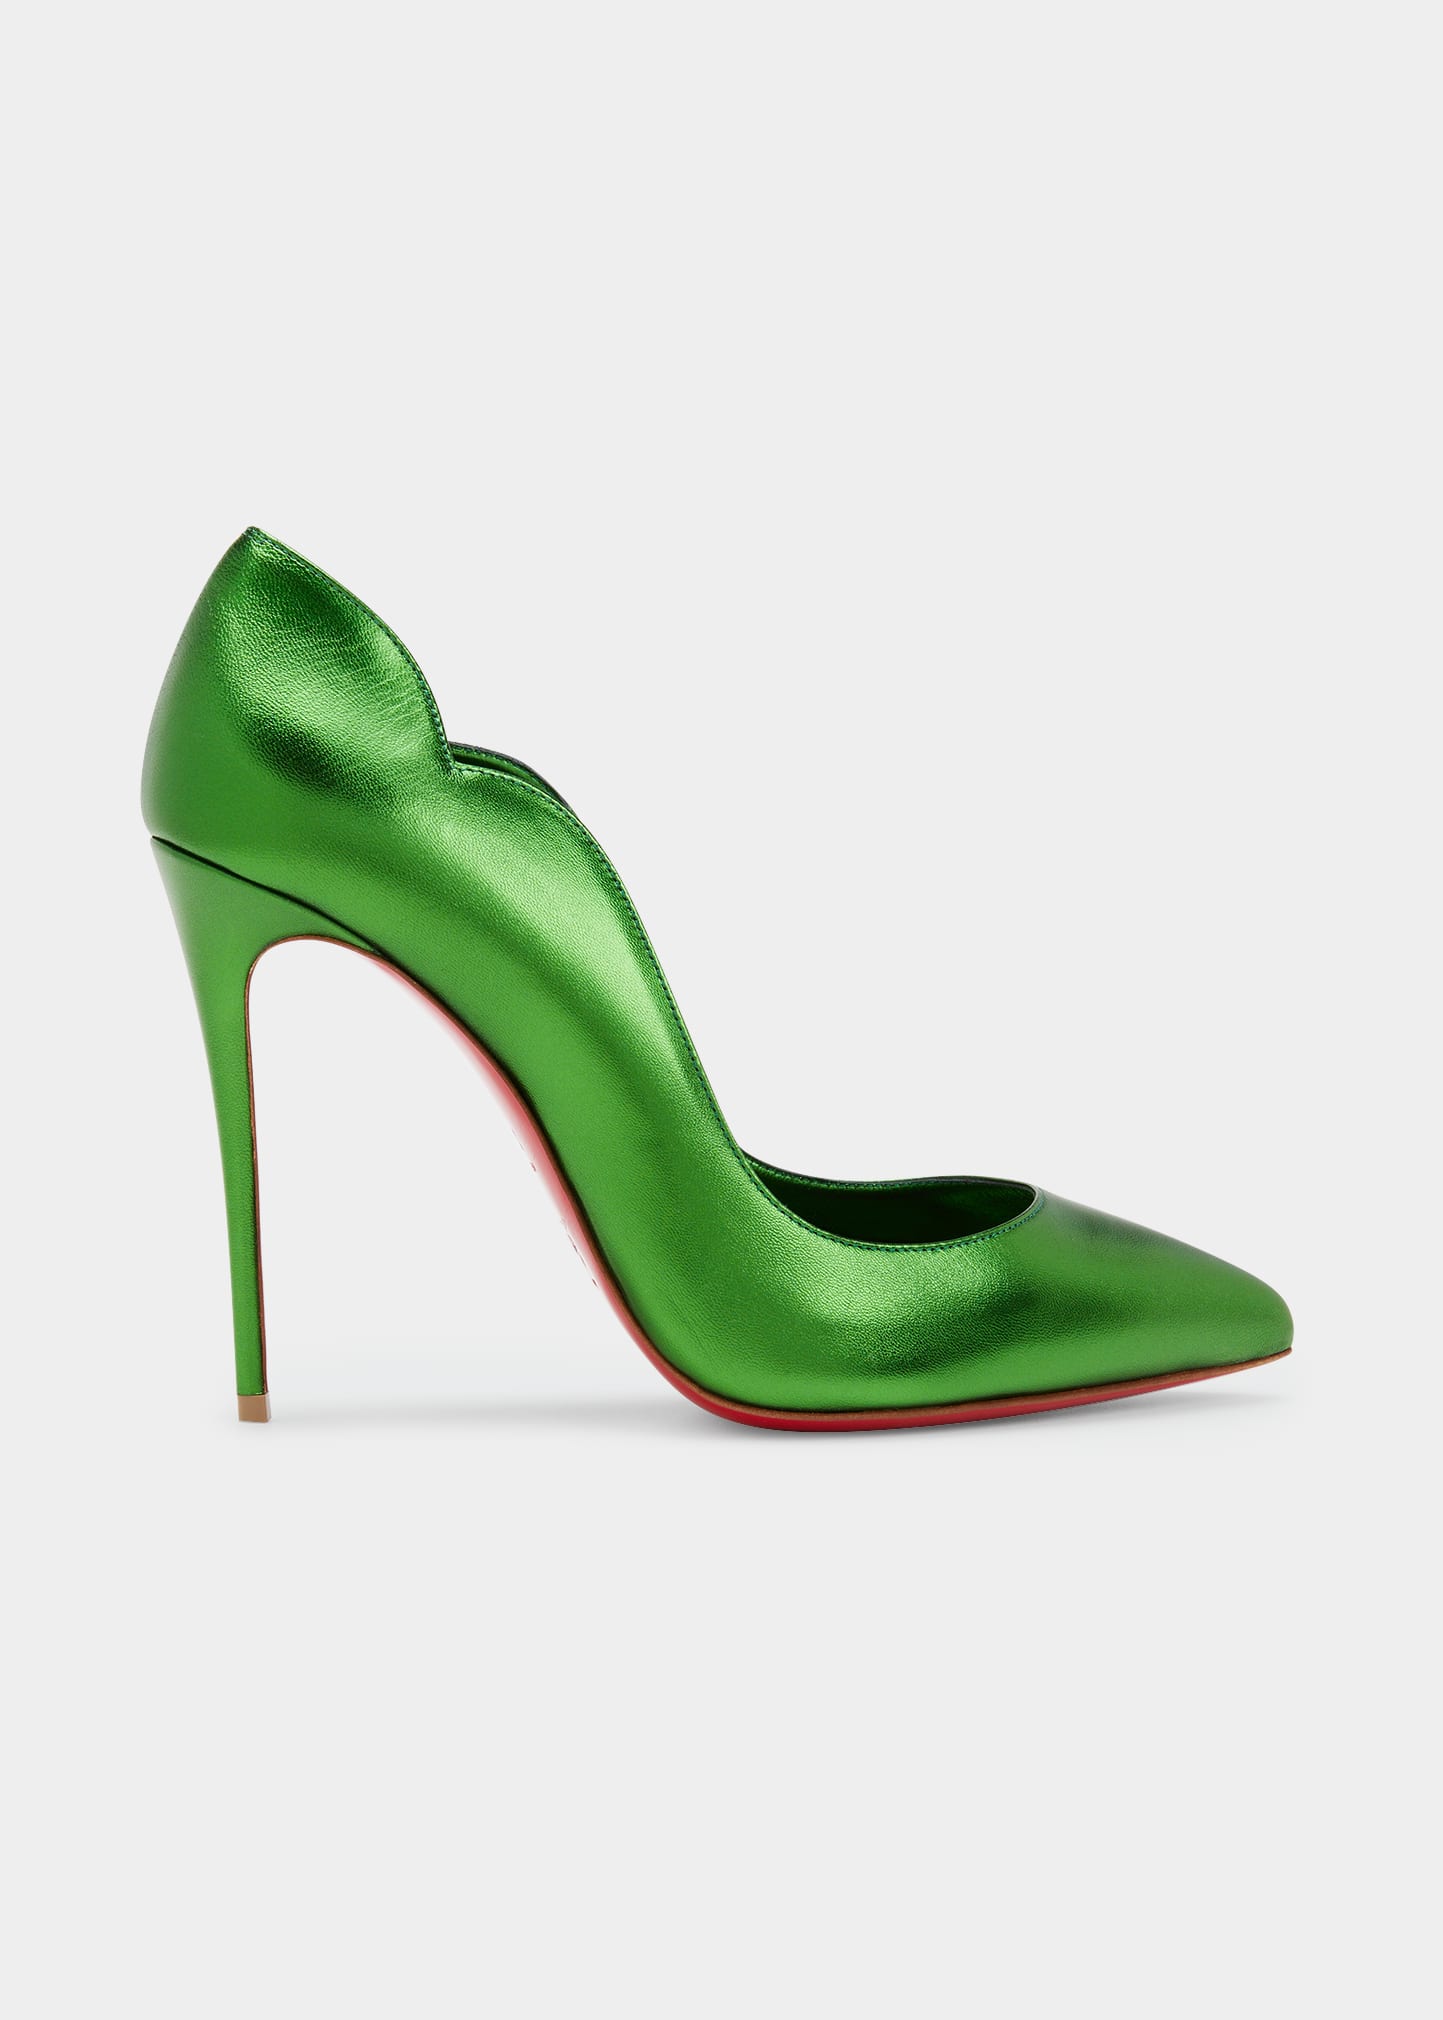 Christian Louboutin Hot Chick Red Sole Metallic Leather Pumps